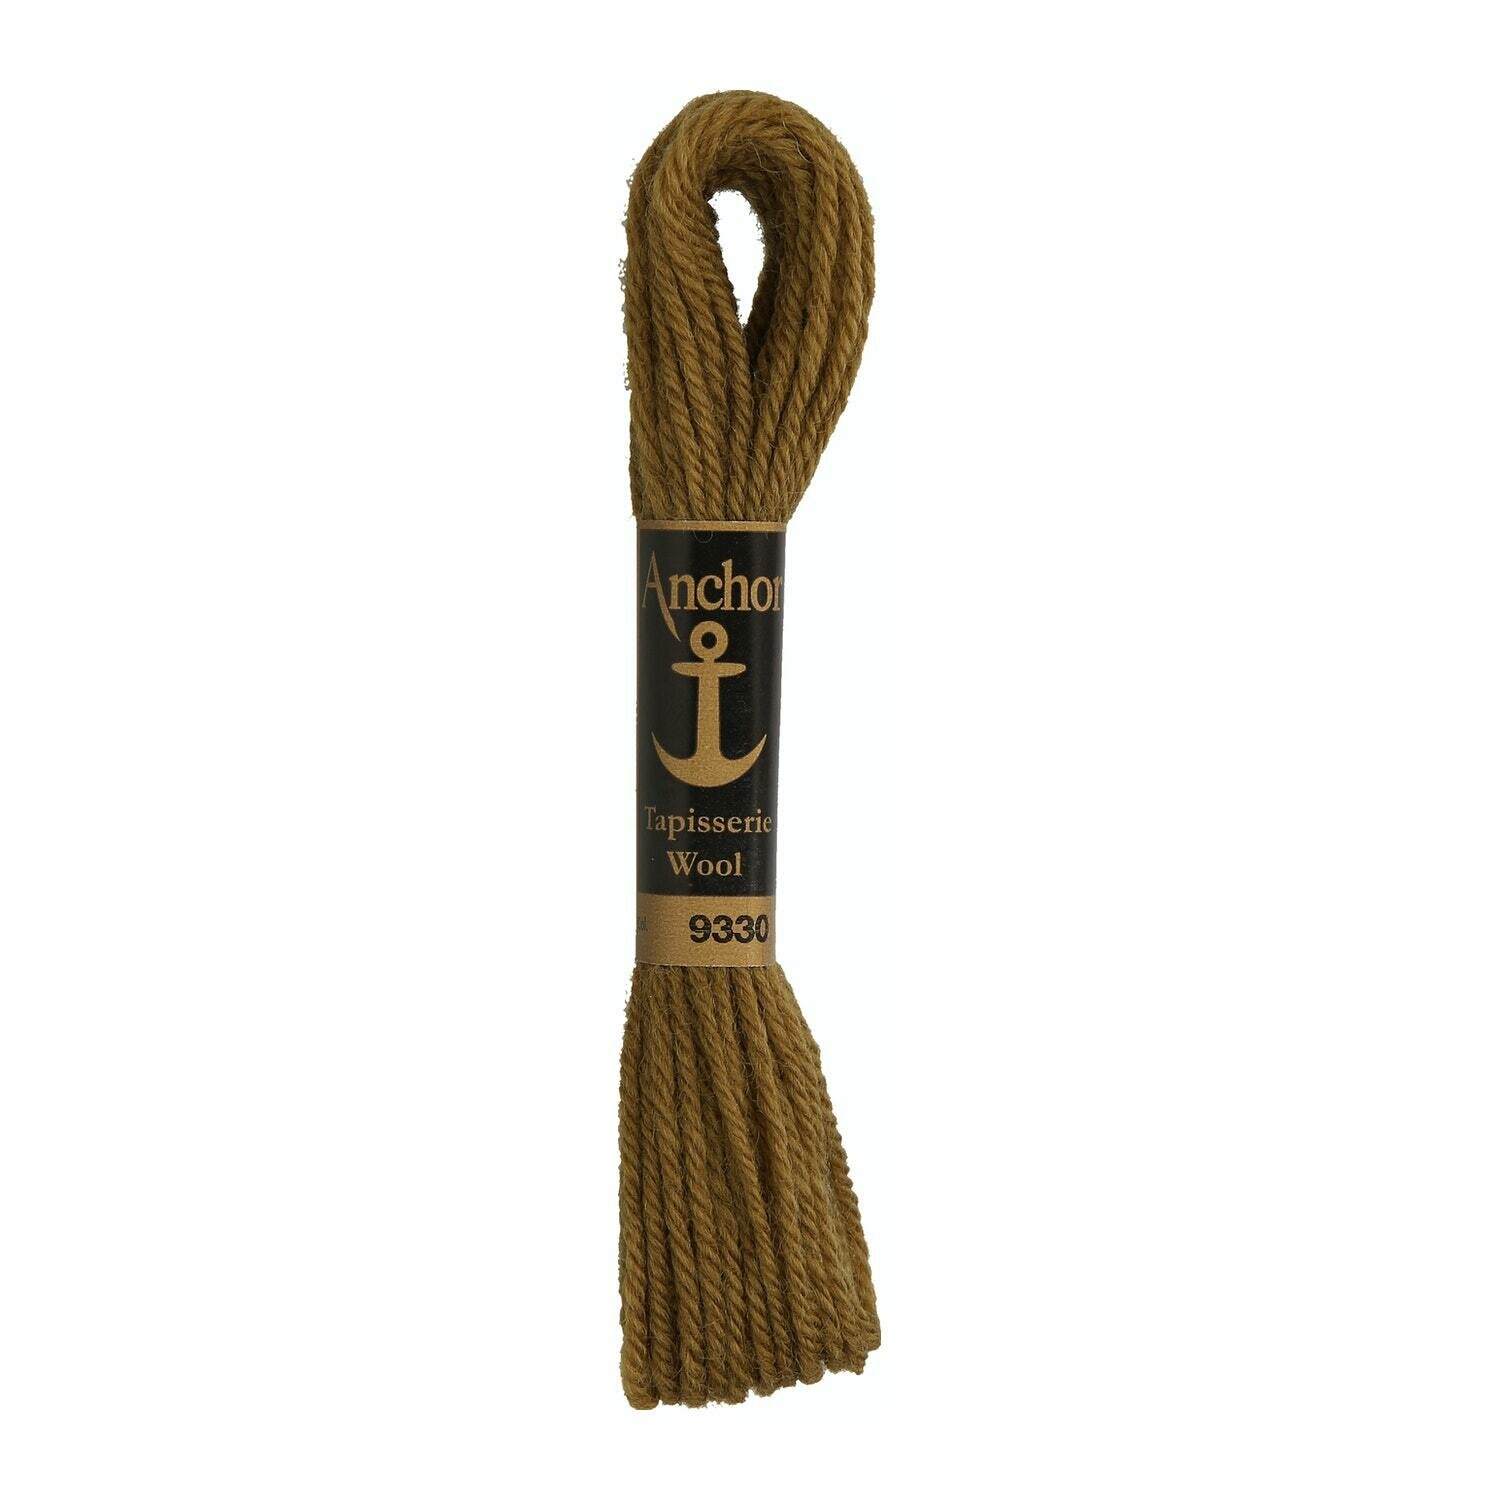 Anchor Tapisserie Wool # 09330